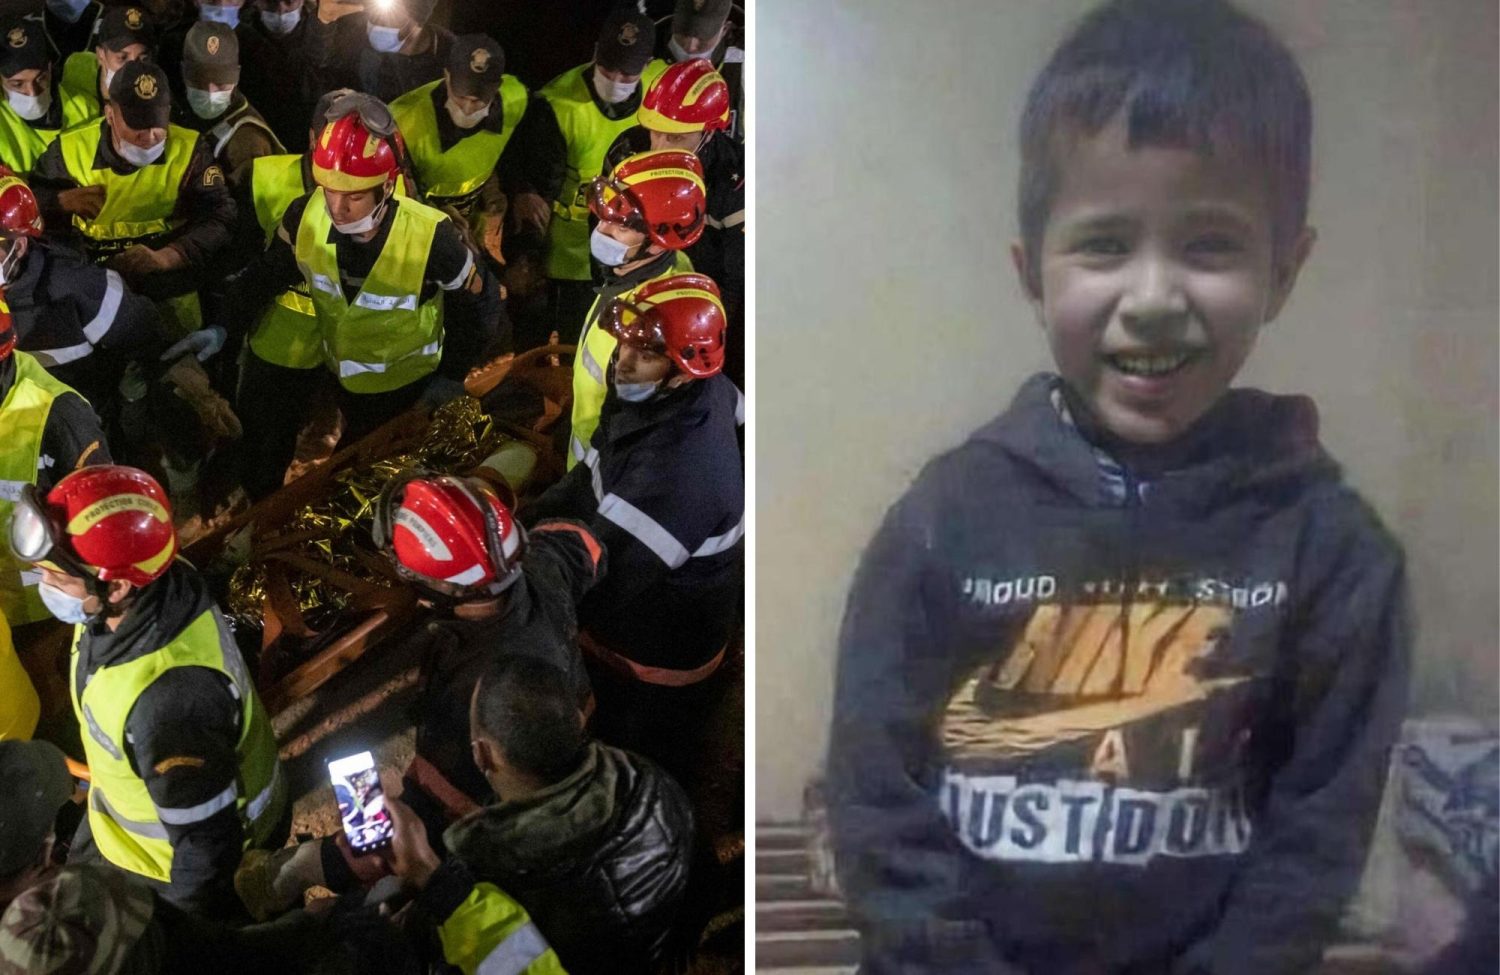 Body Of Tragic Moroccan Boy Rayan Is Brought Out Of Well